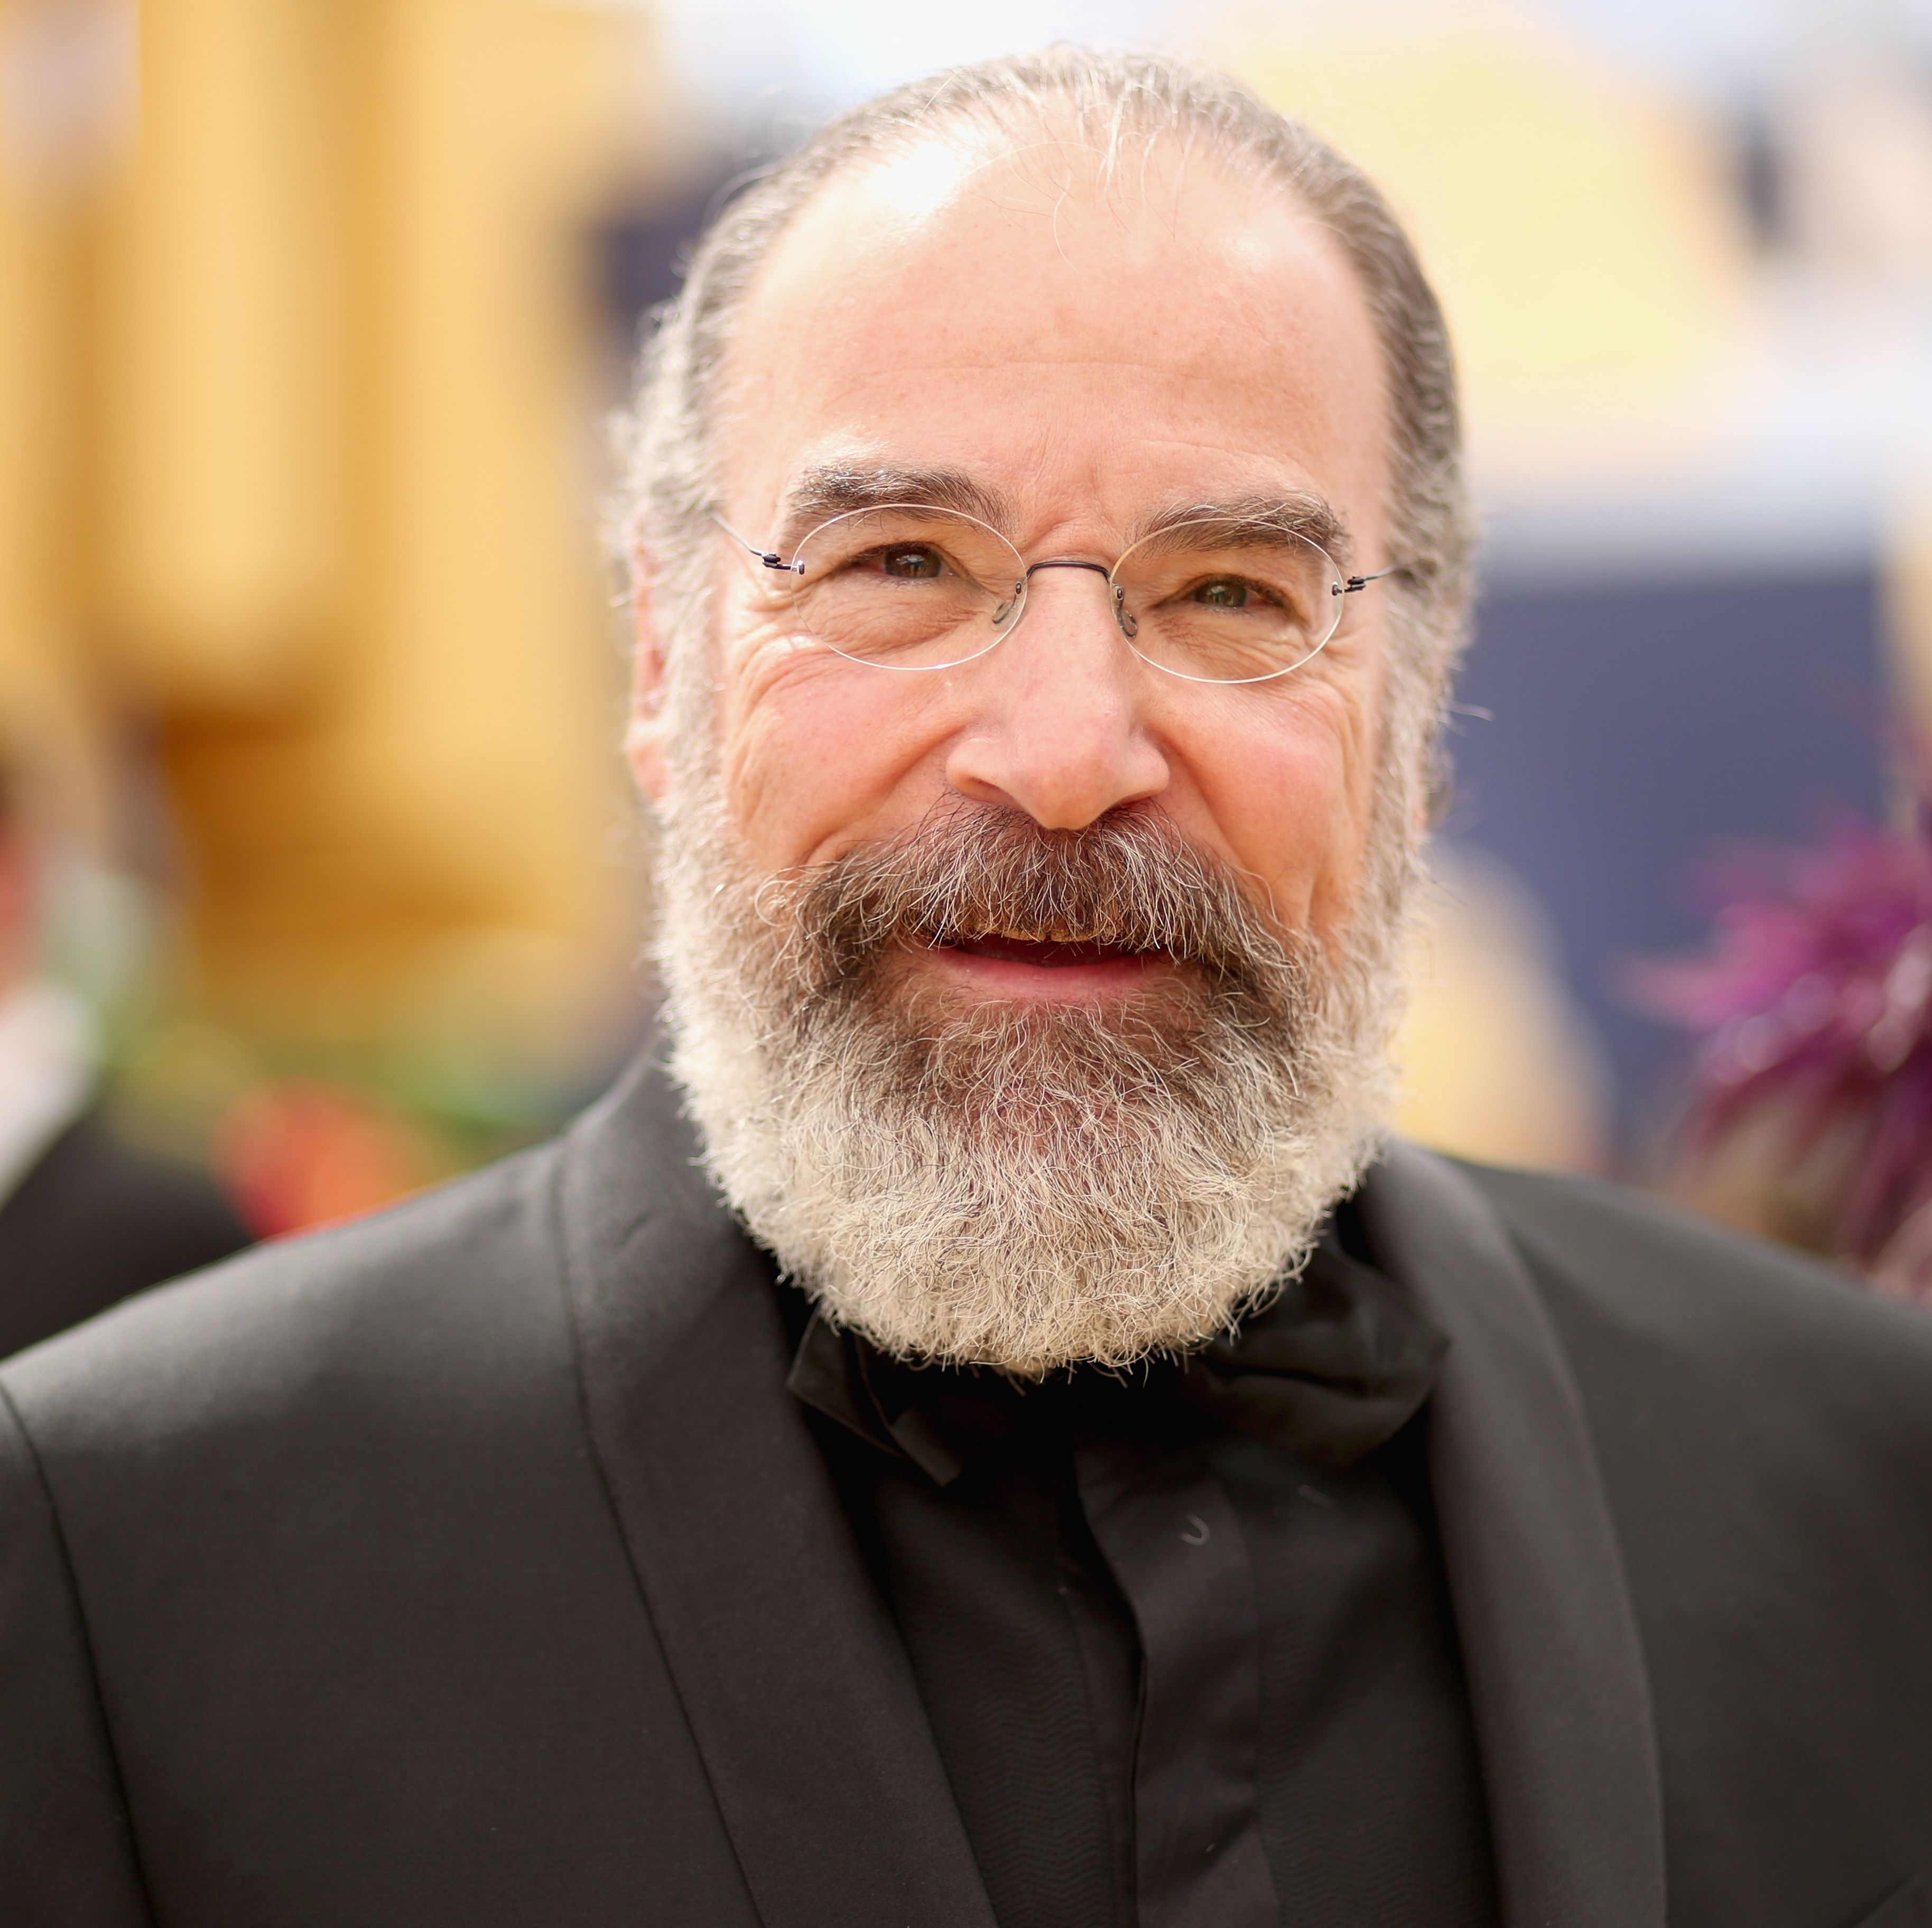 In an Emotional TikTok, Mandy Patinkin Describes the Connection Between His 'Princess Bride' Role and His Father